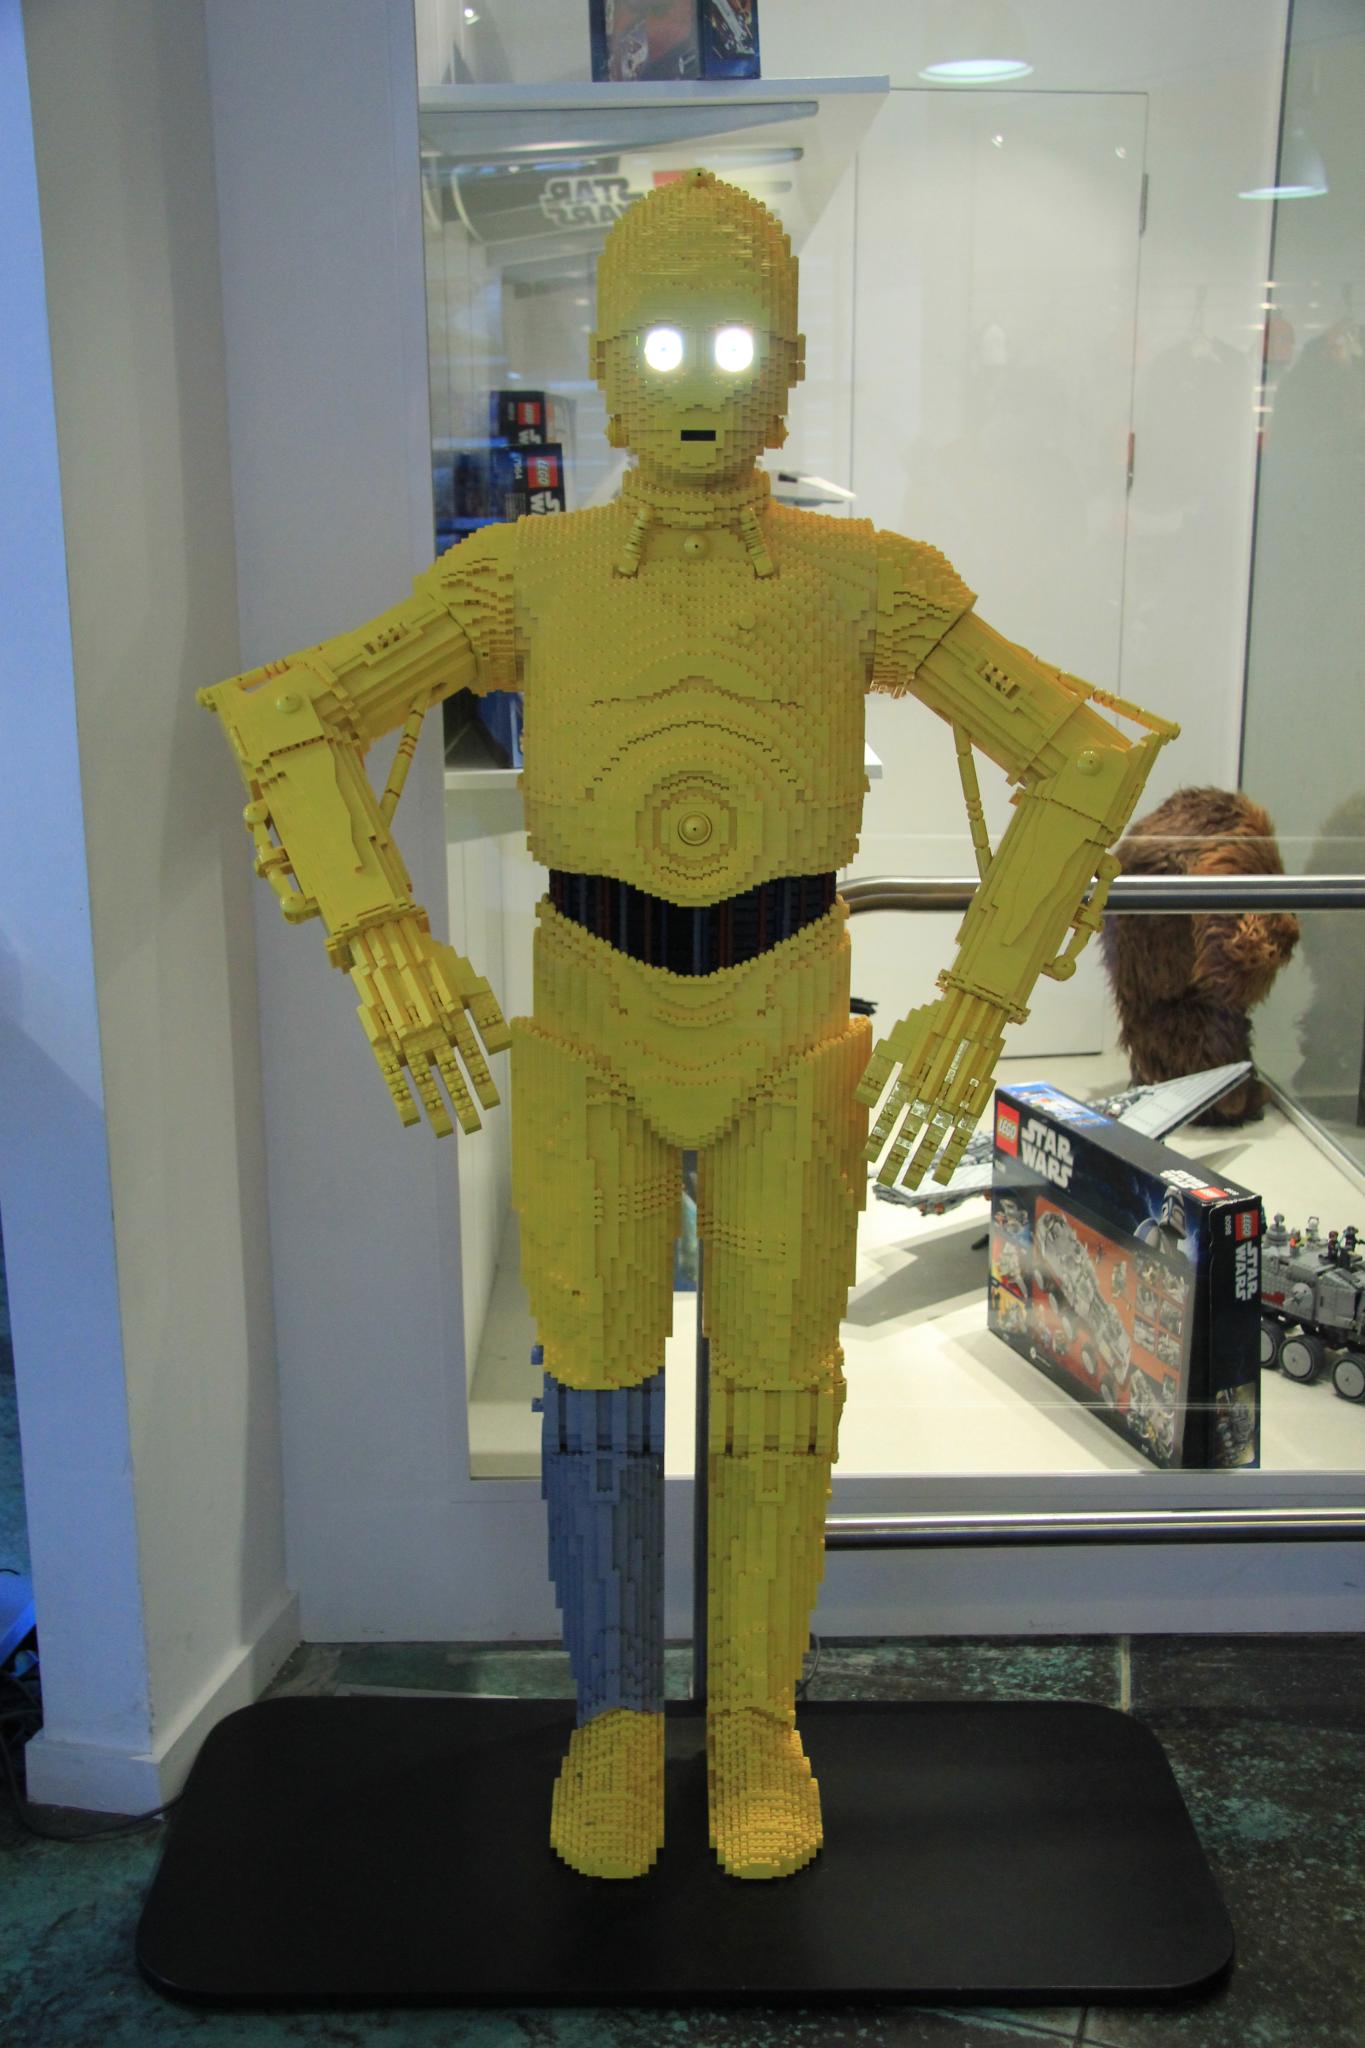 a robot made with yellow plastic legos sits in front of a glass display